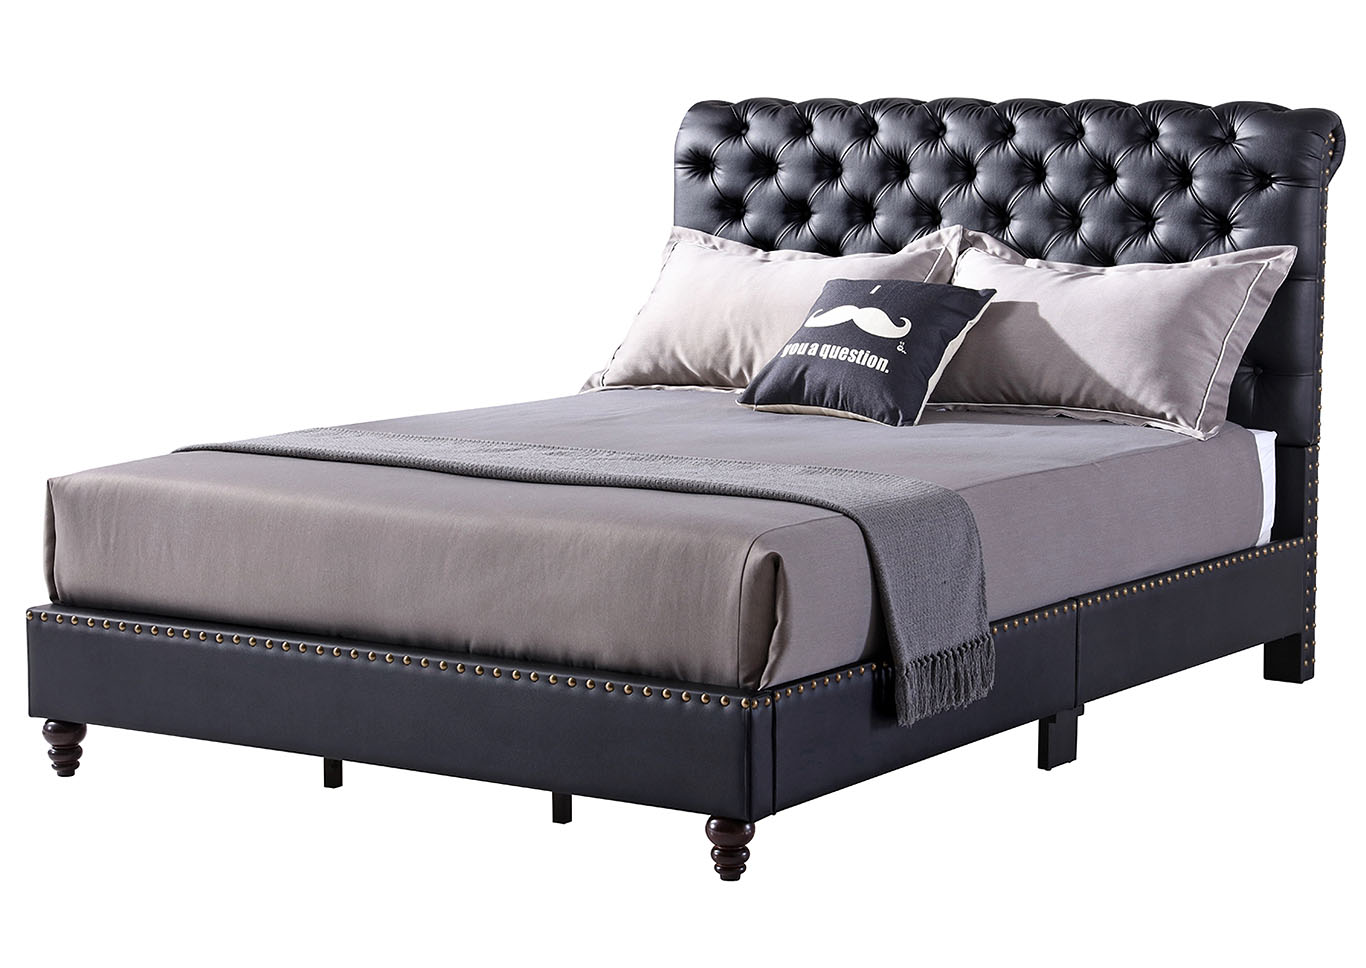 Black Faux Leather Tufted Upholstered Queen Bed,Glory Furniture